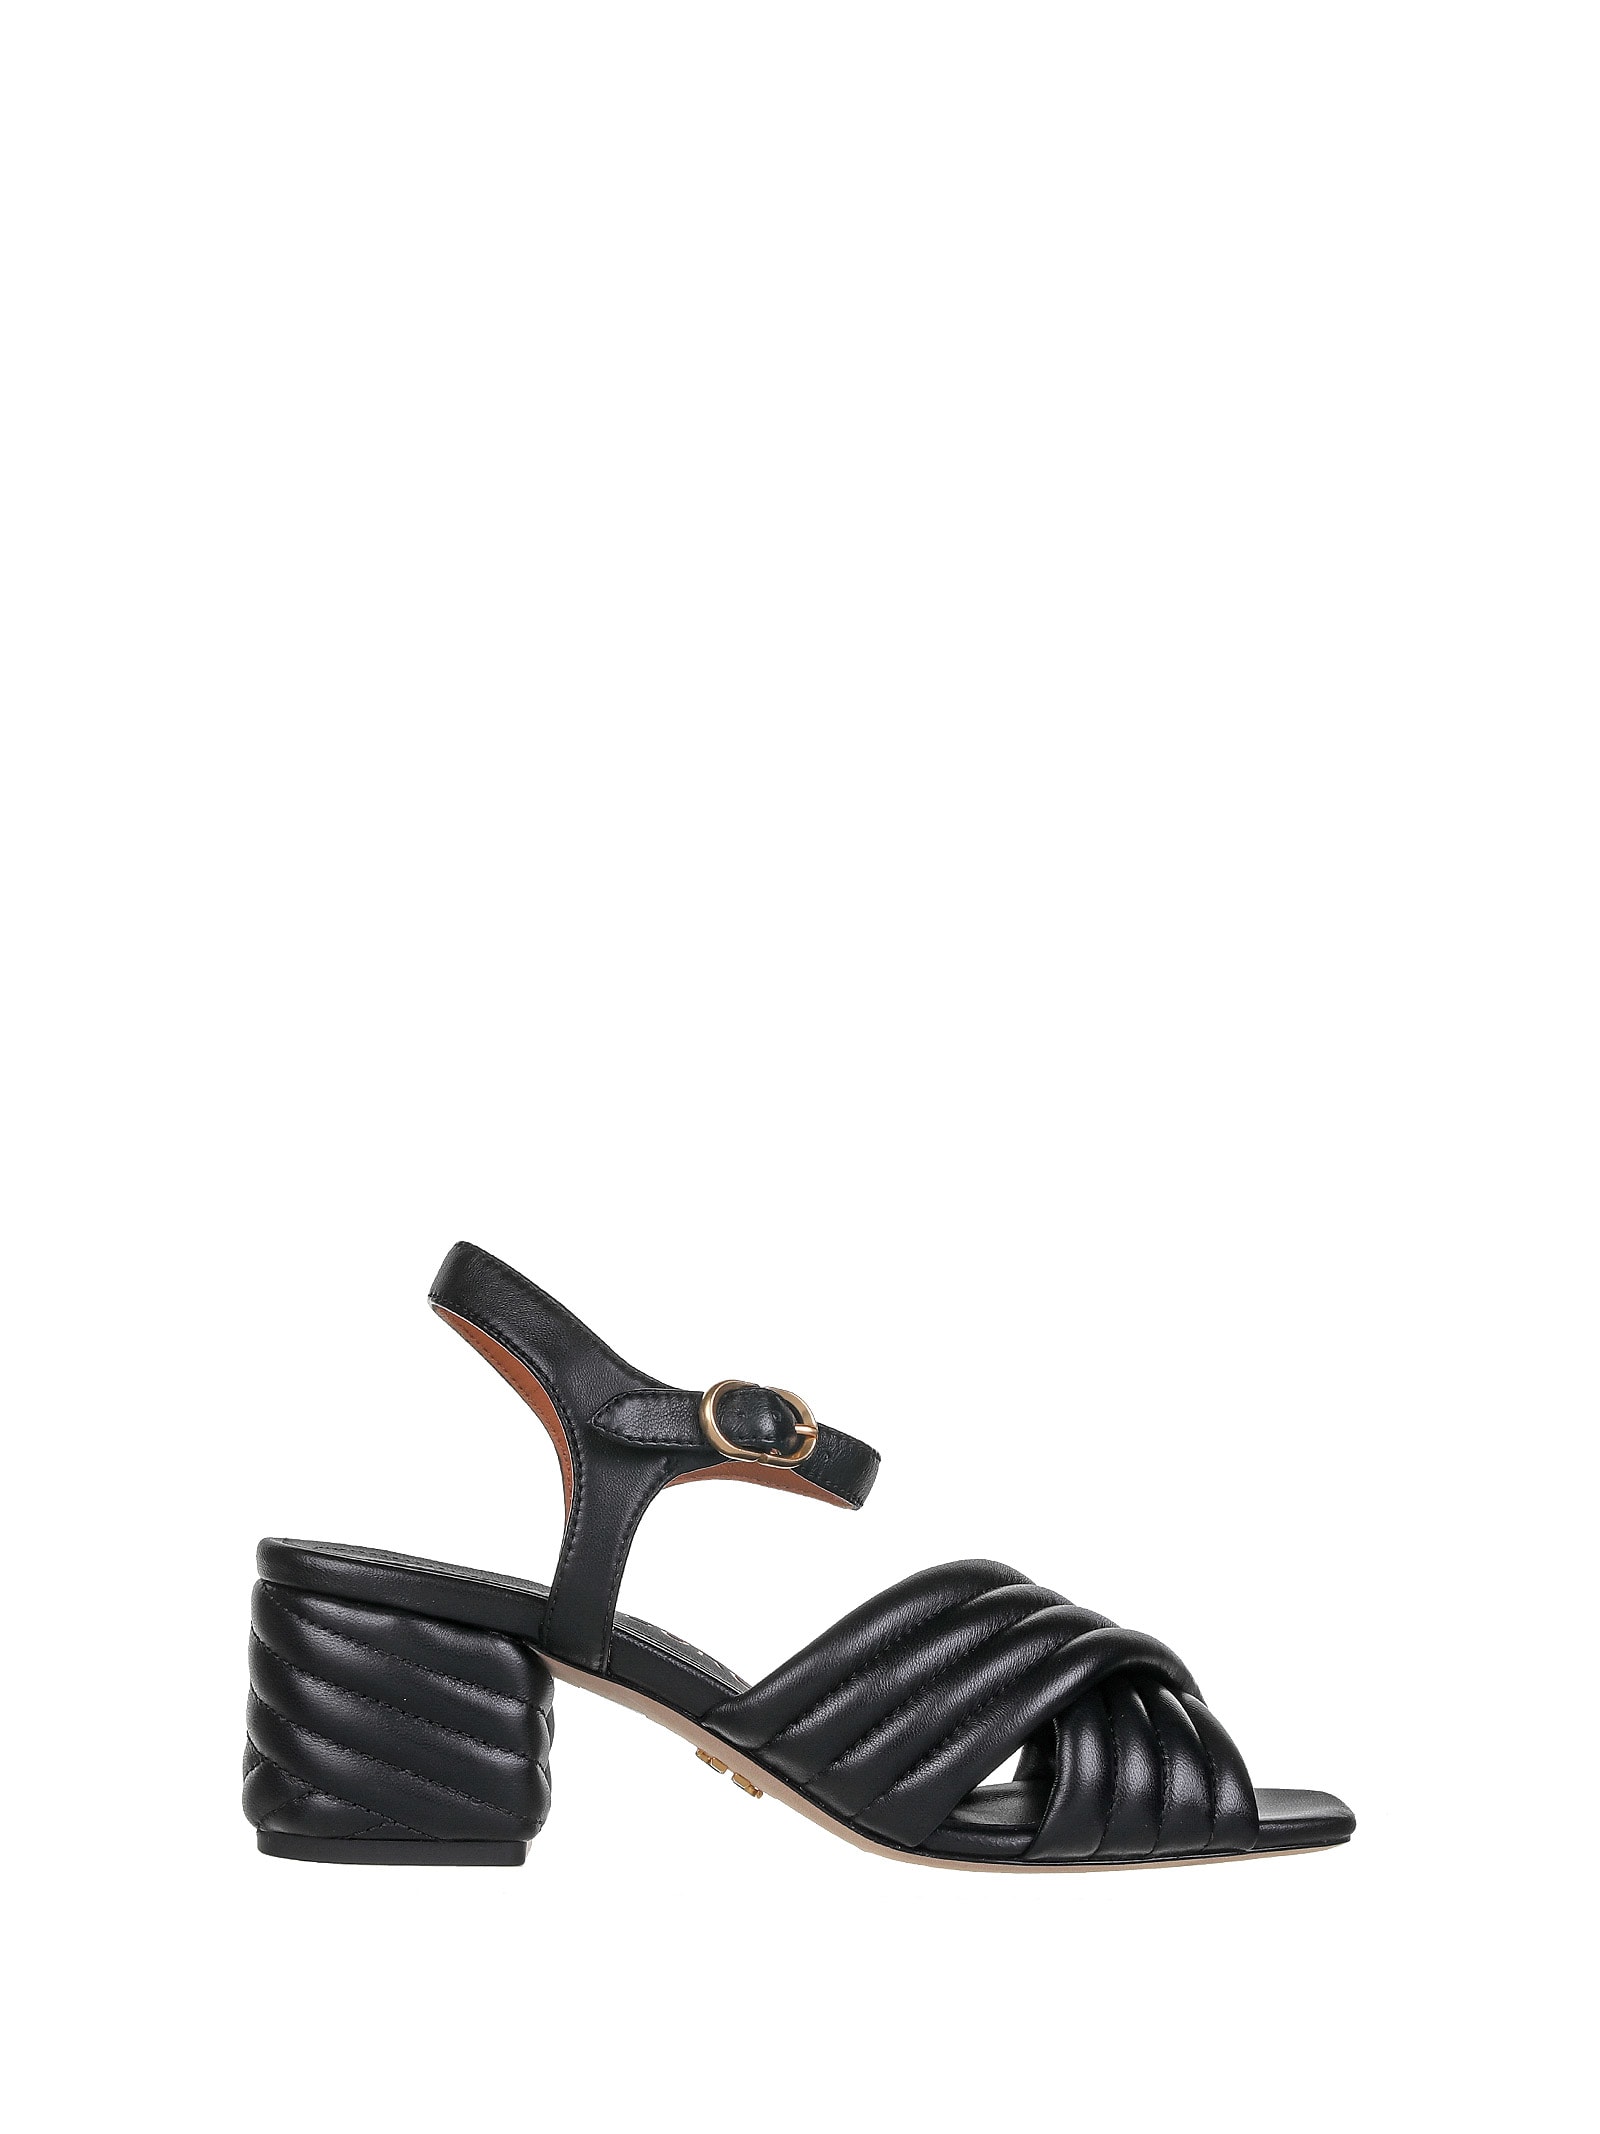 Tory Burch Tory Burch Crossover Sandals